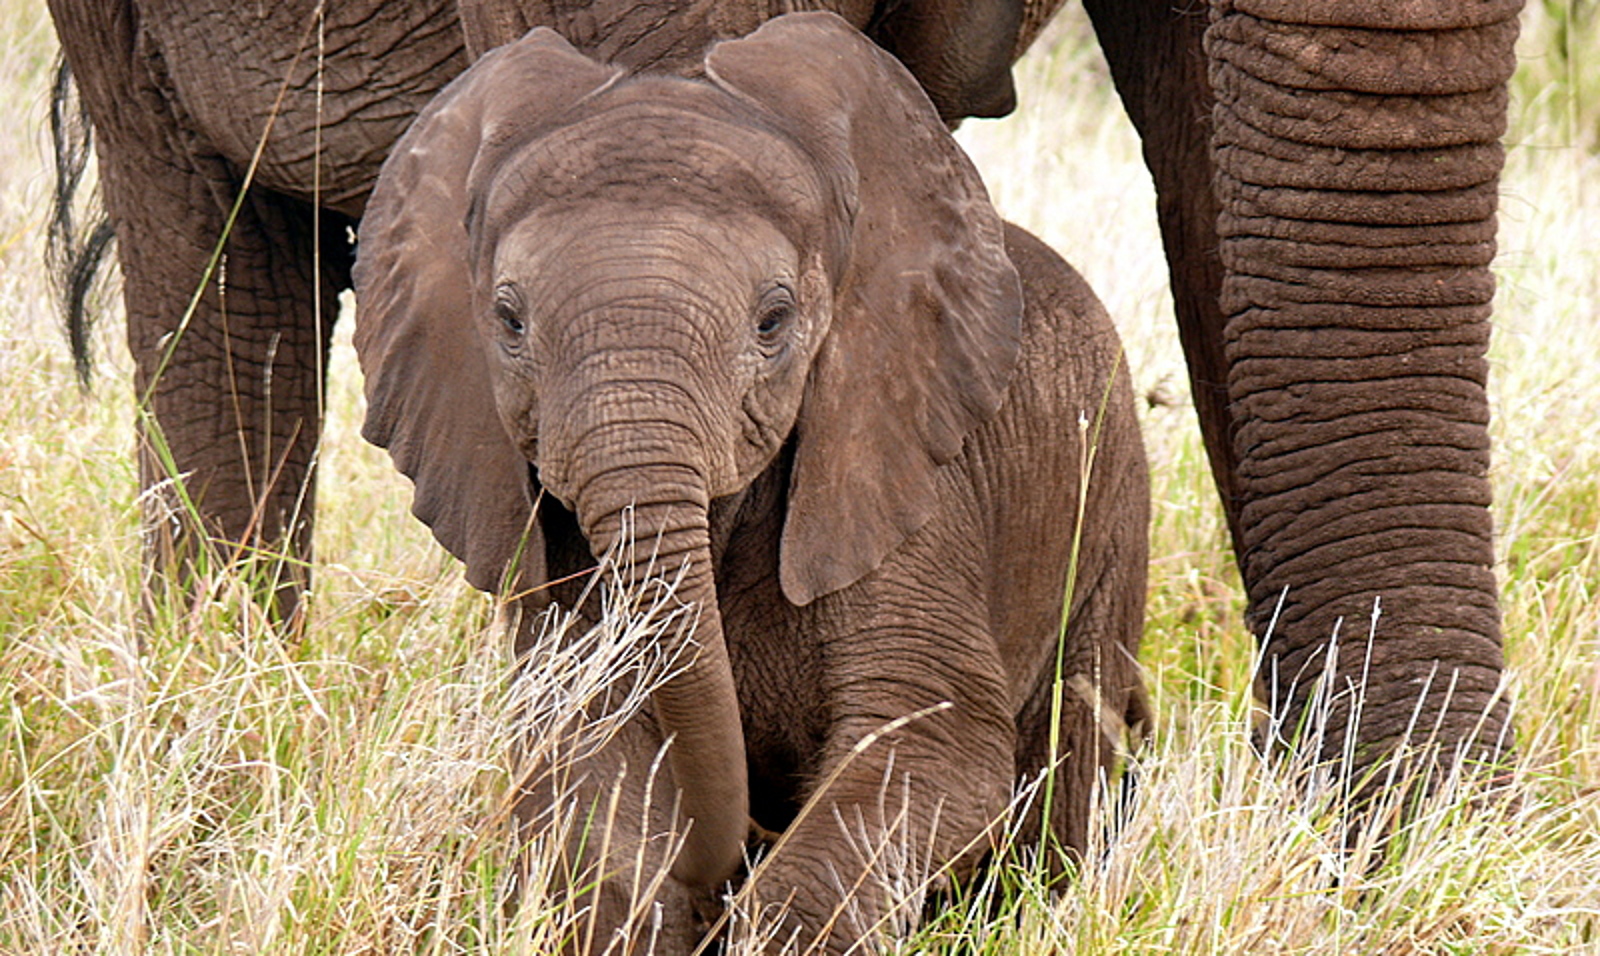 Will Humanity Step up for Elephants